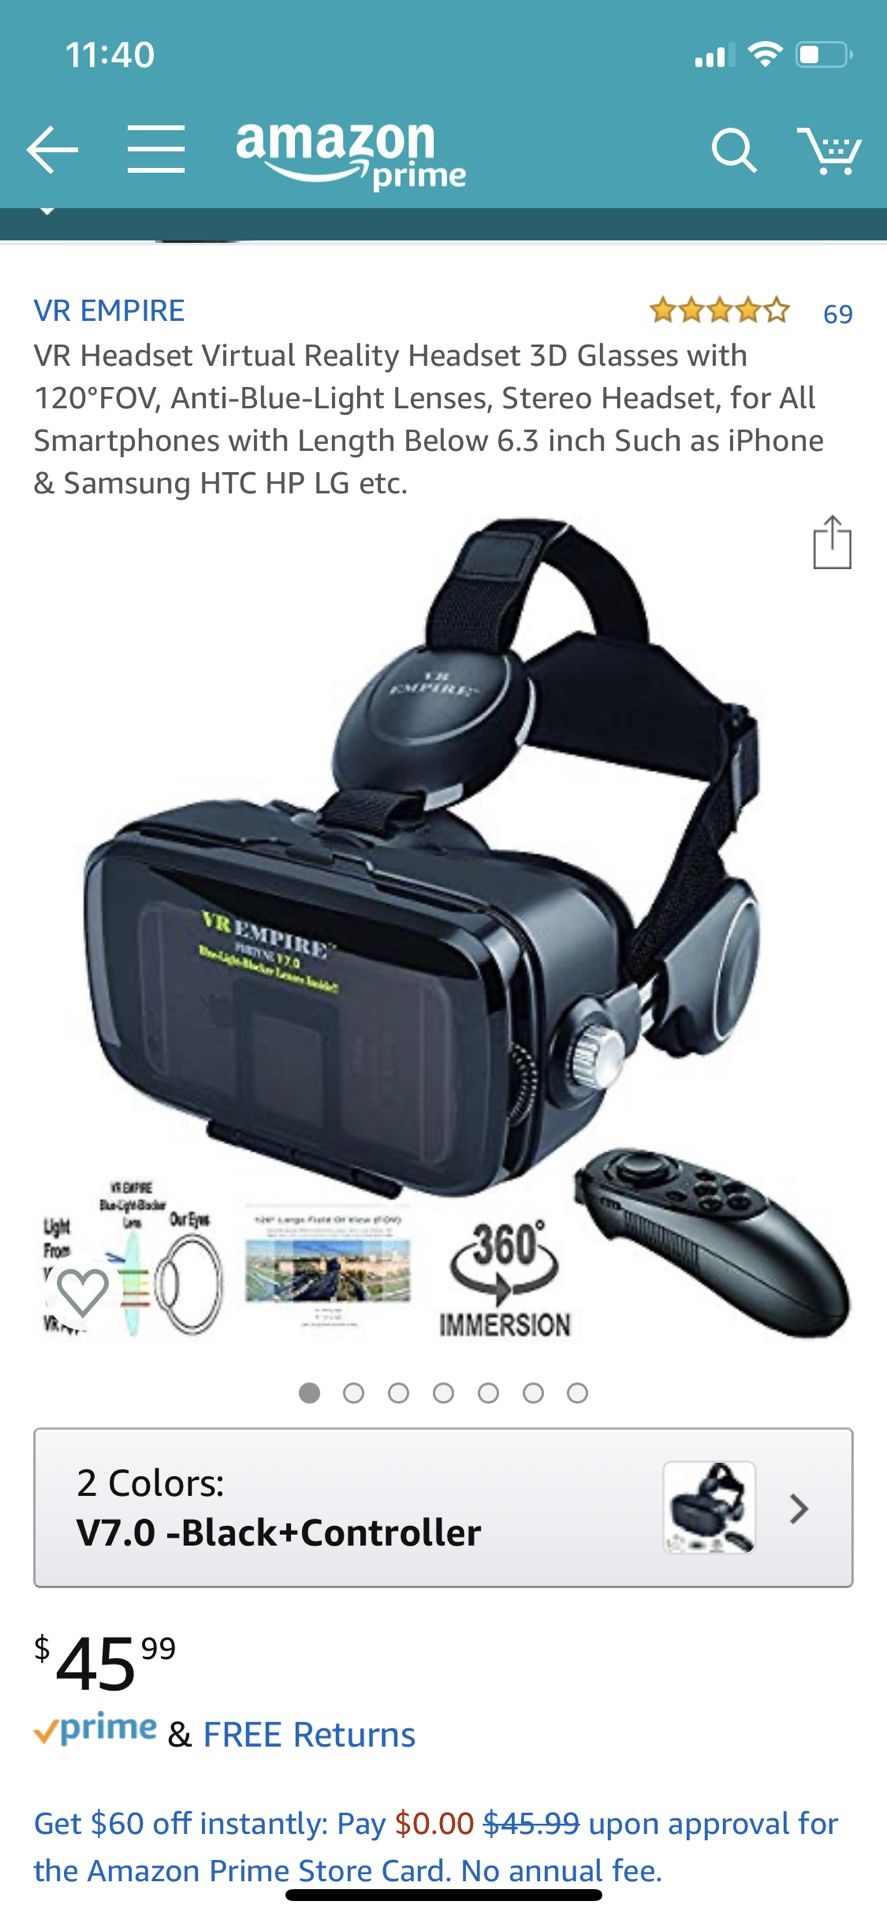 VR Headset Virtual Reality Headset 3D Glasses with 120°FOV,